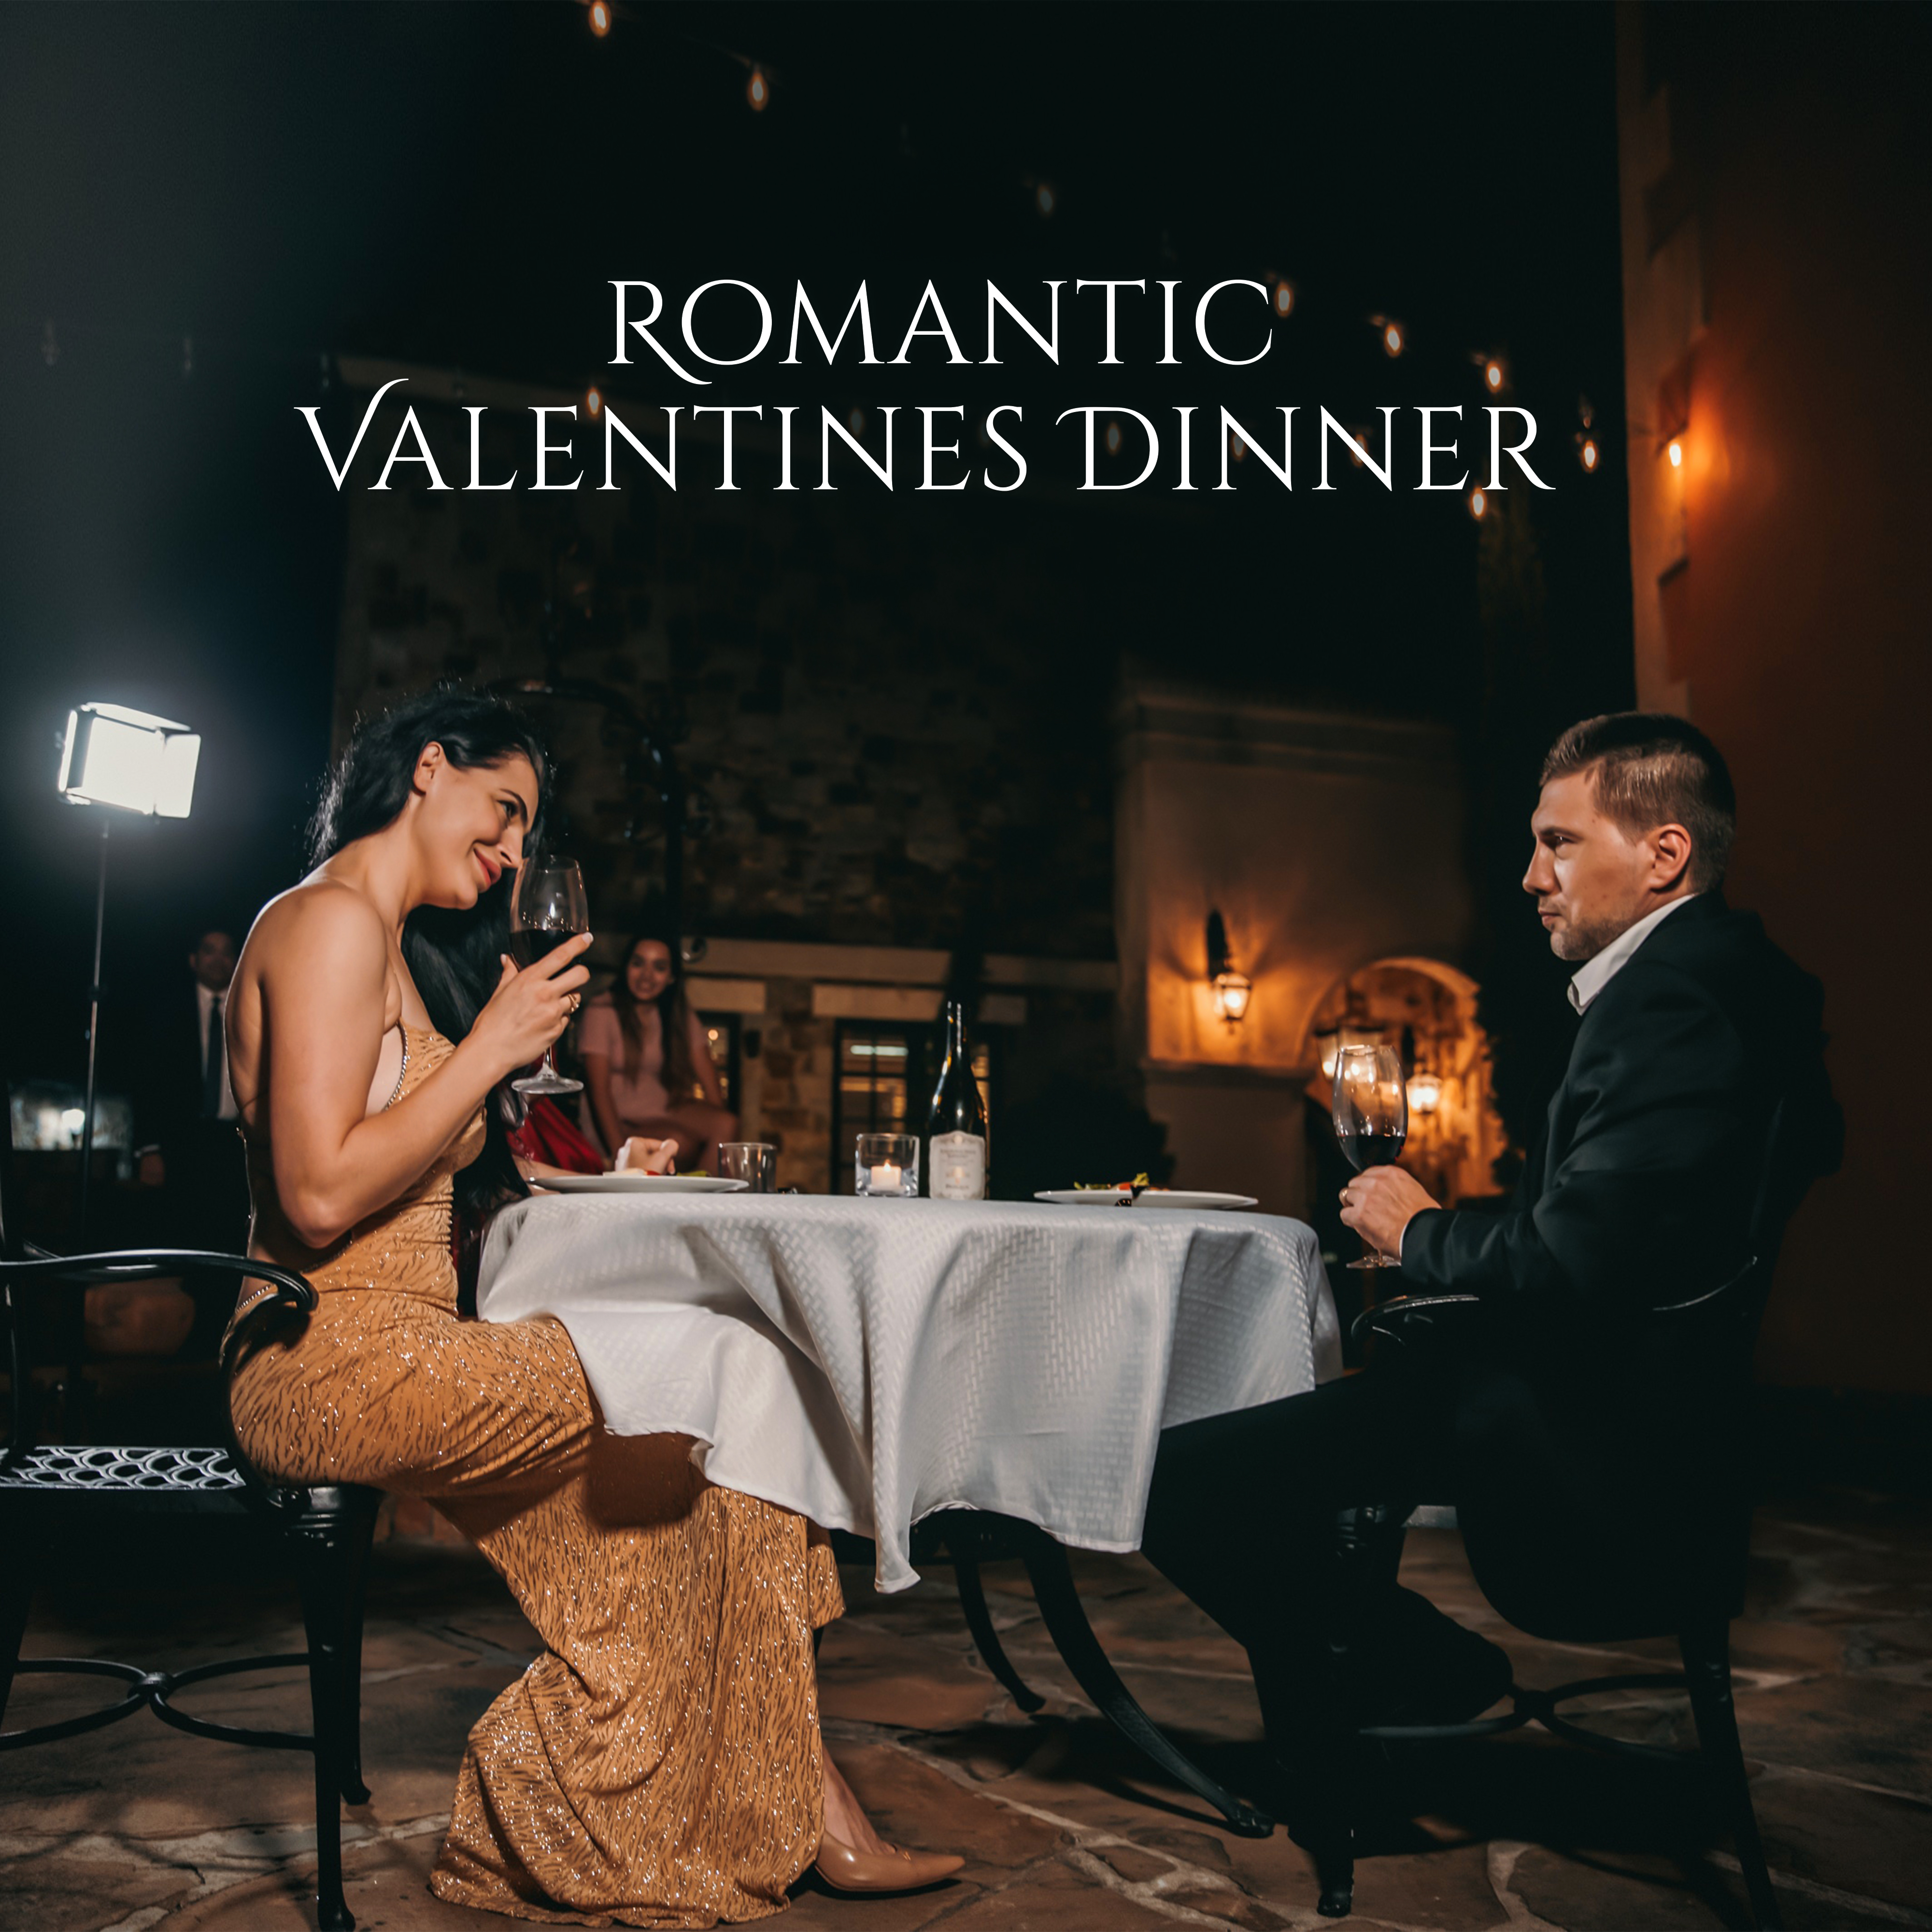 Romantic Valentines Dinner  Sensual Jazz Music, Jazz Coffee, Romantic Songs for Restaurant, Relaxation, Sweet Jazz for Lovers